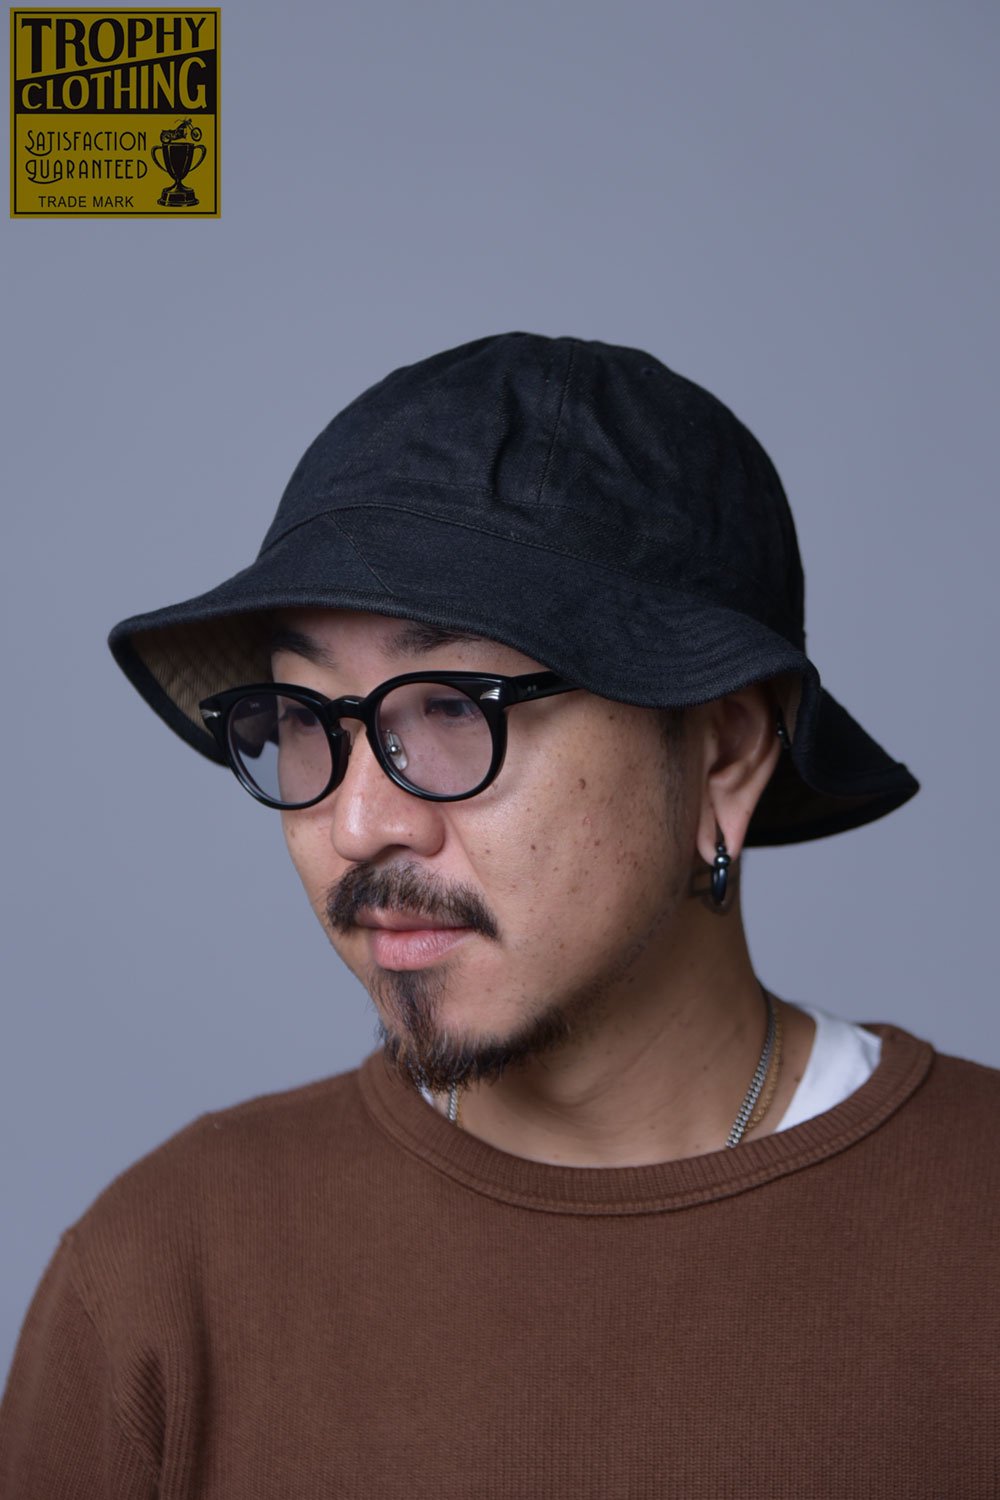 TROPHY CLOTHING(トロフィークロージング) デニムハット DENIM ARMY HAT TR22AW-701 通販正規取扱 |  ハーレムストア公式通販サイト